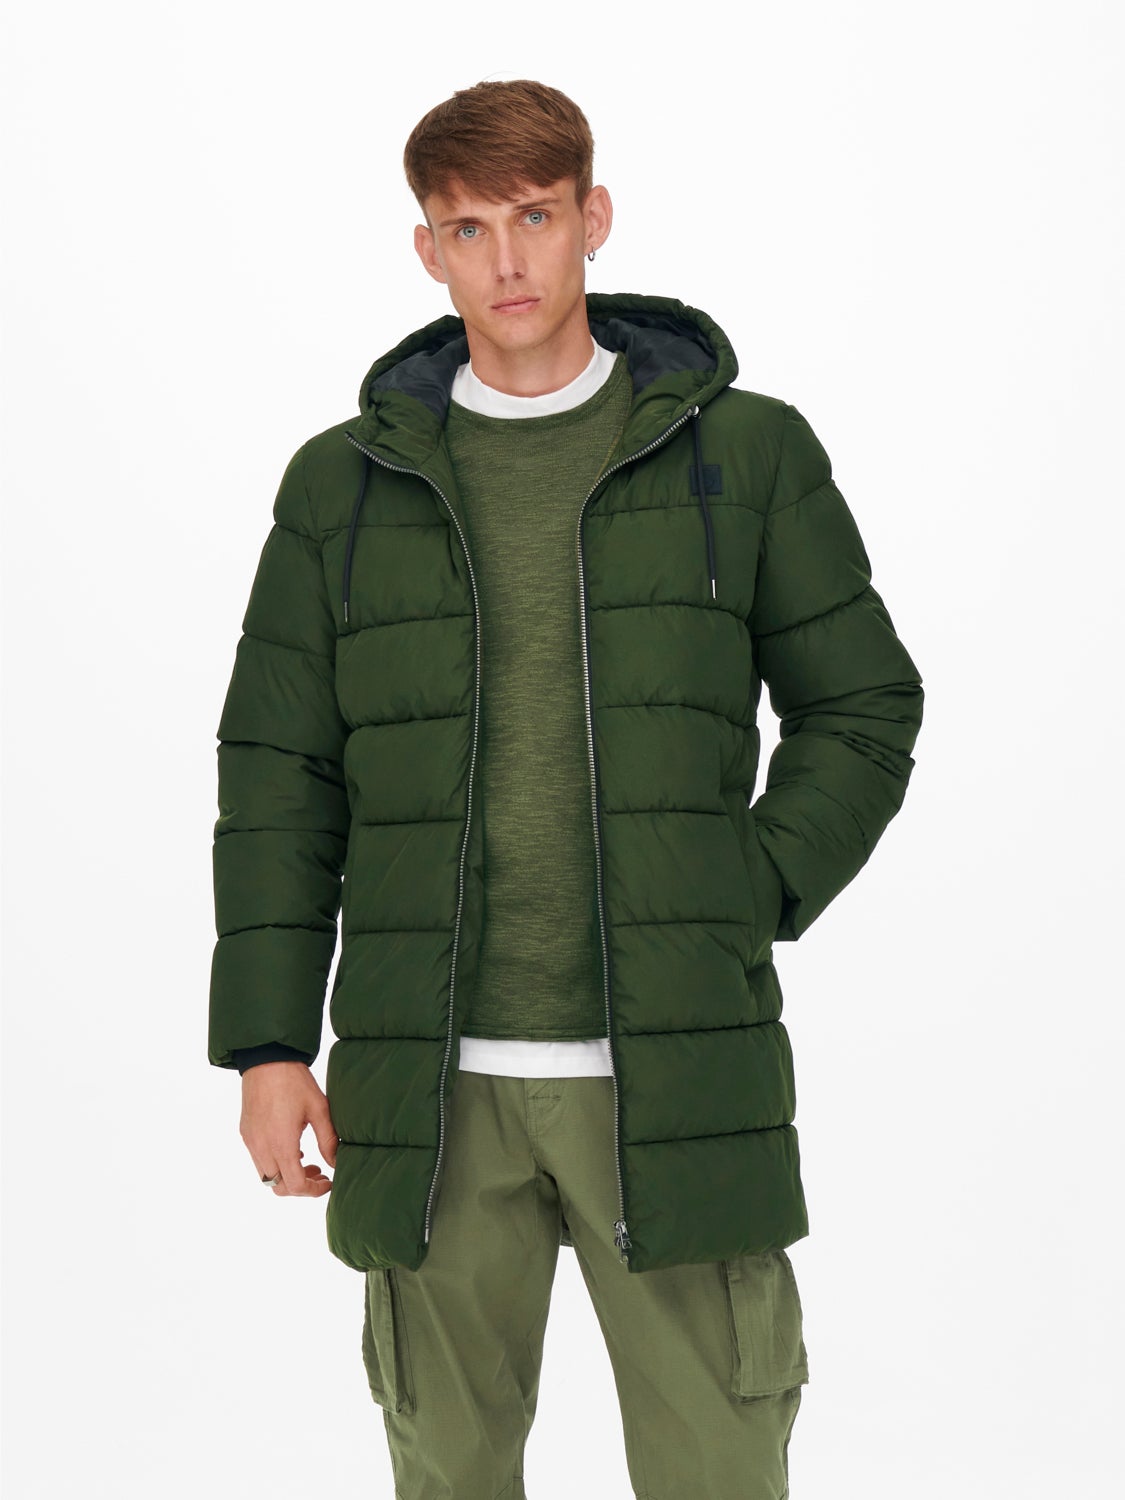 ONLY & SONS vest discount 57% MEN FASHION Jackets Basic Green S 